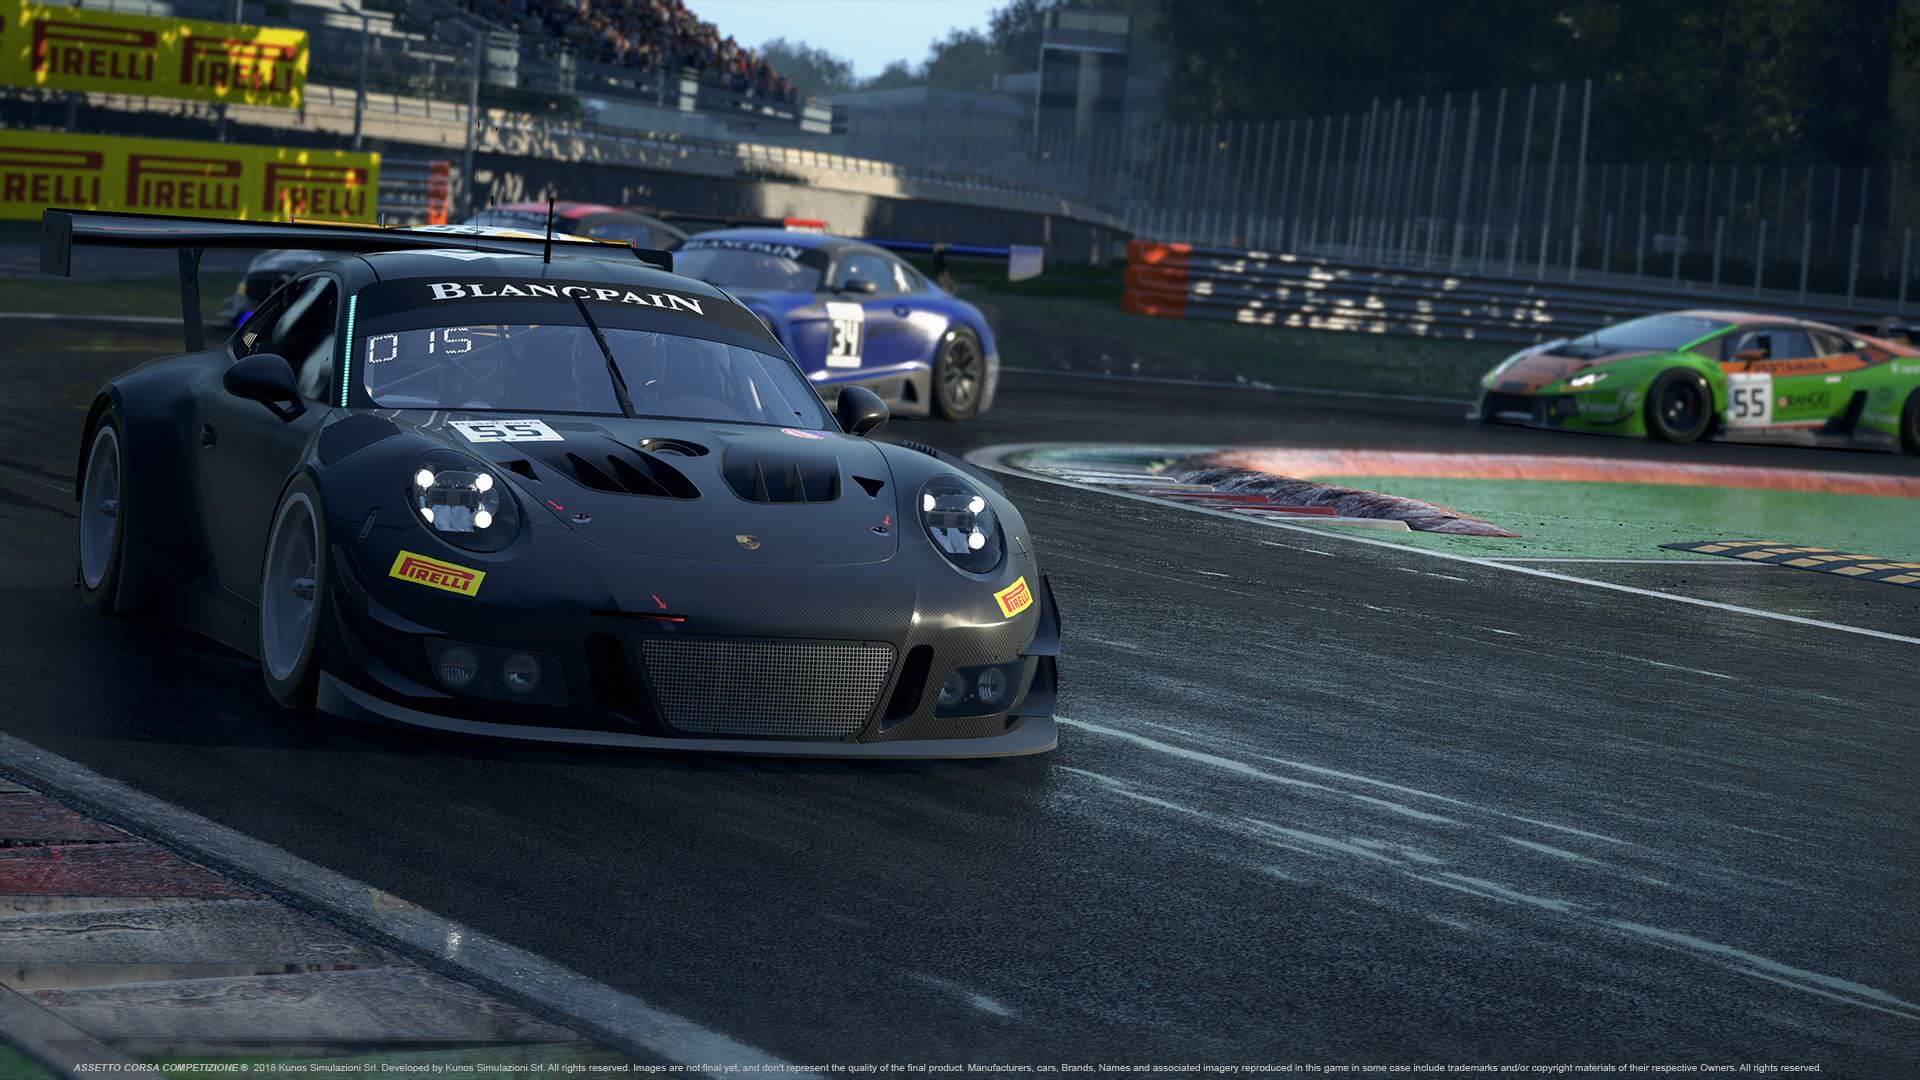 Assetto Corsa Competizione adds both AMD FSR, and NVIDIA DLSS tech